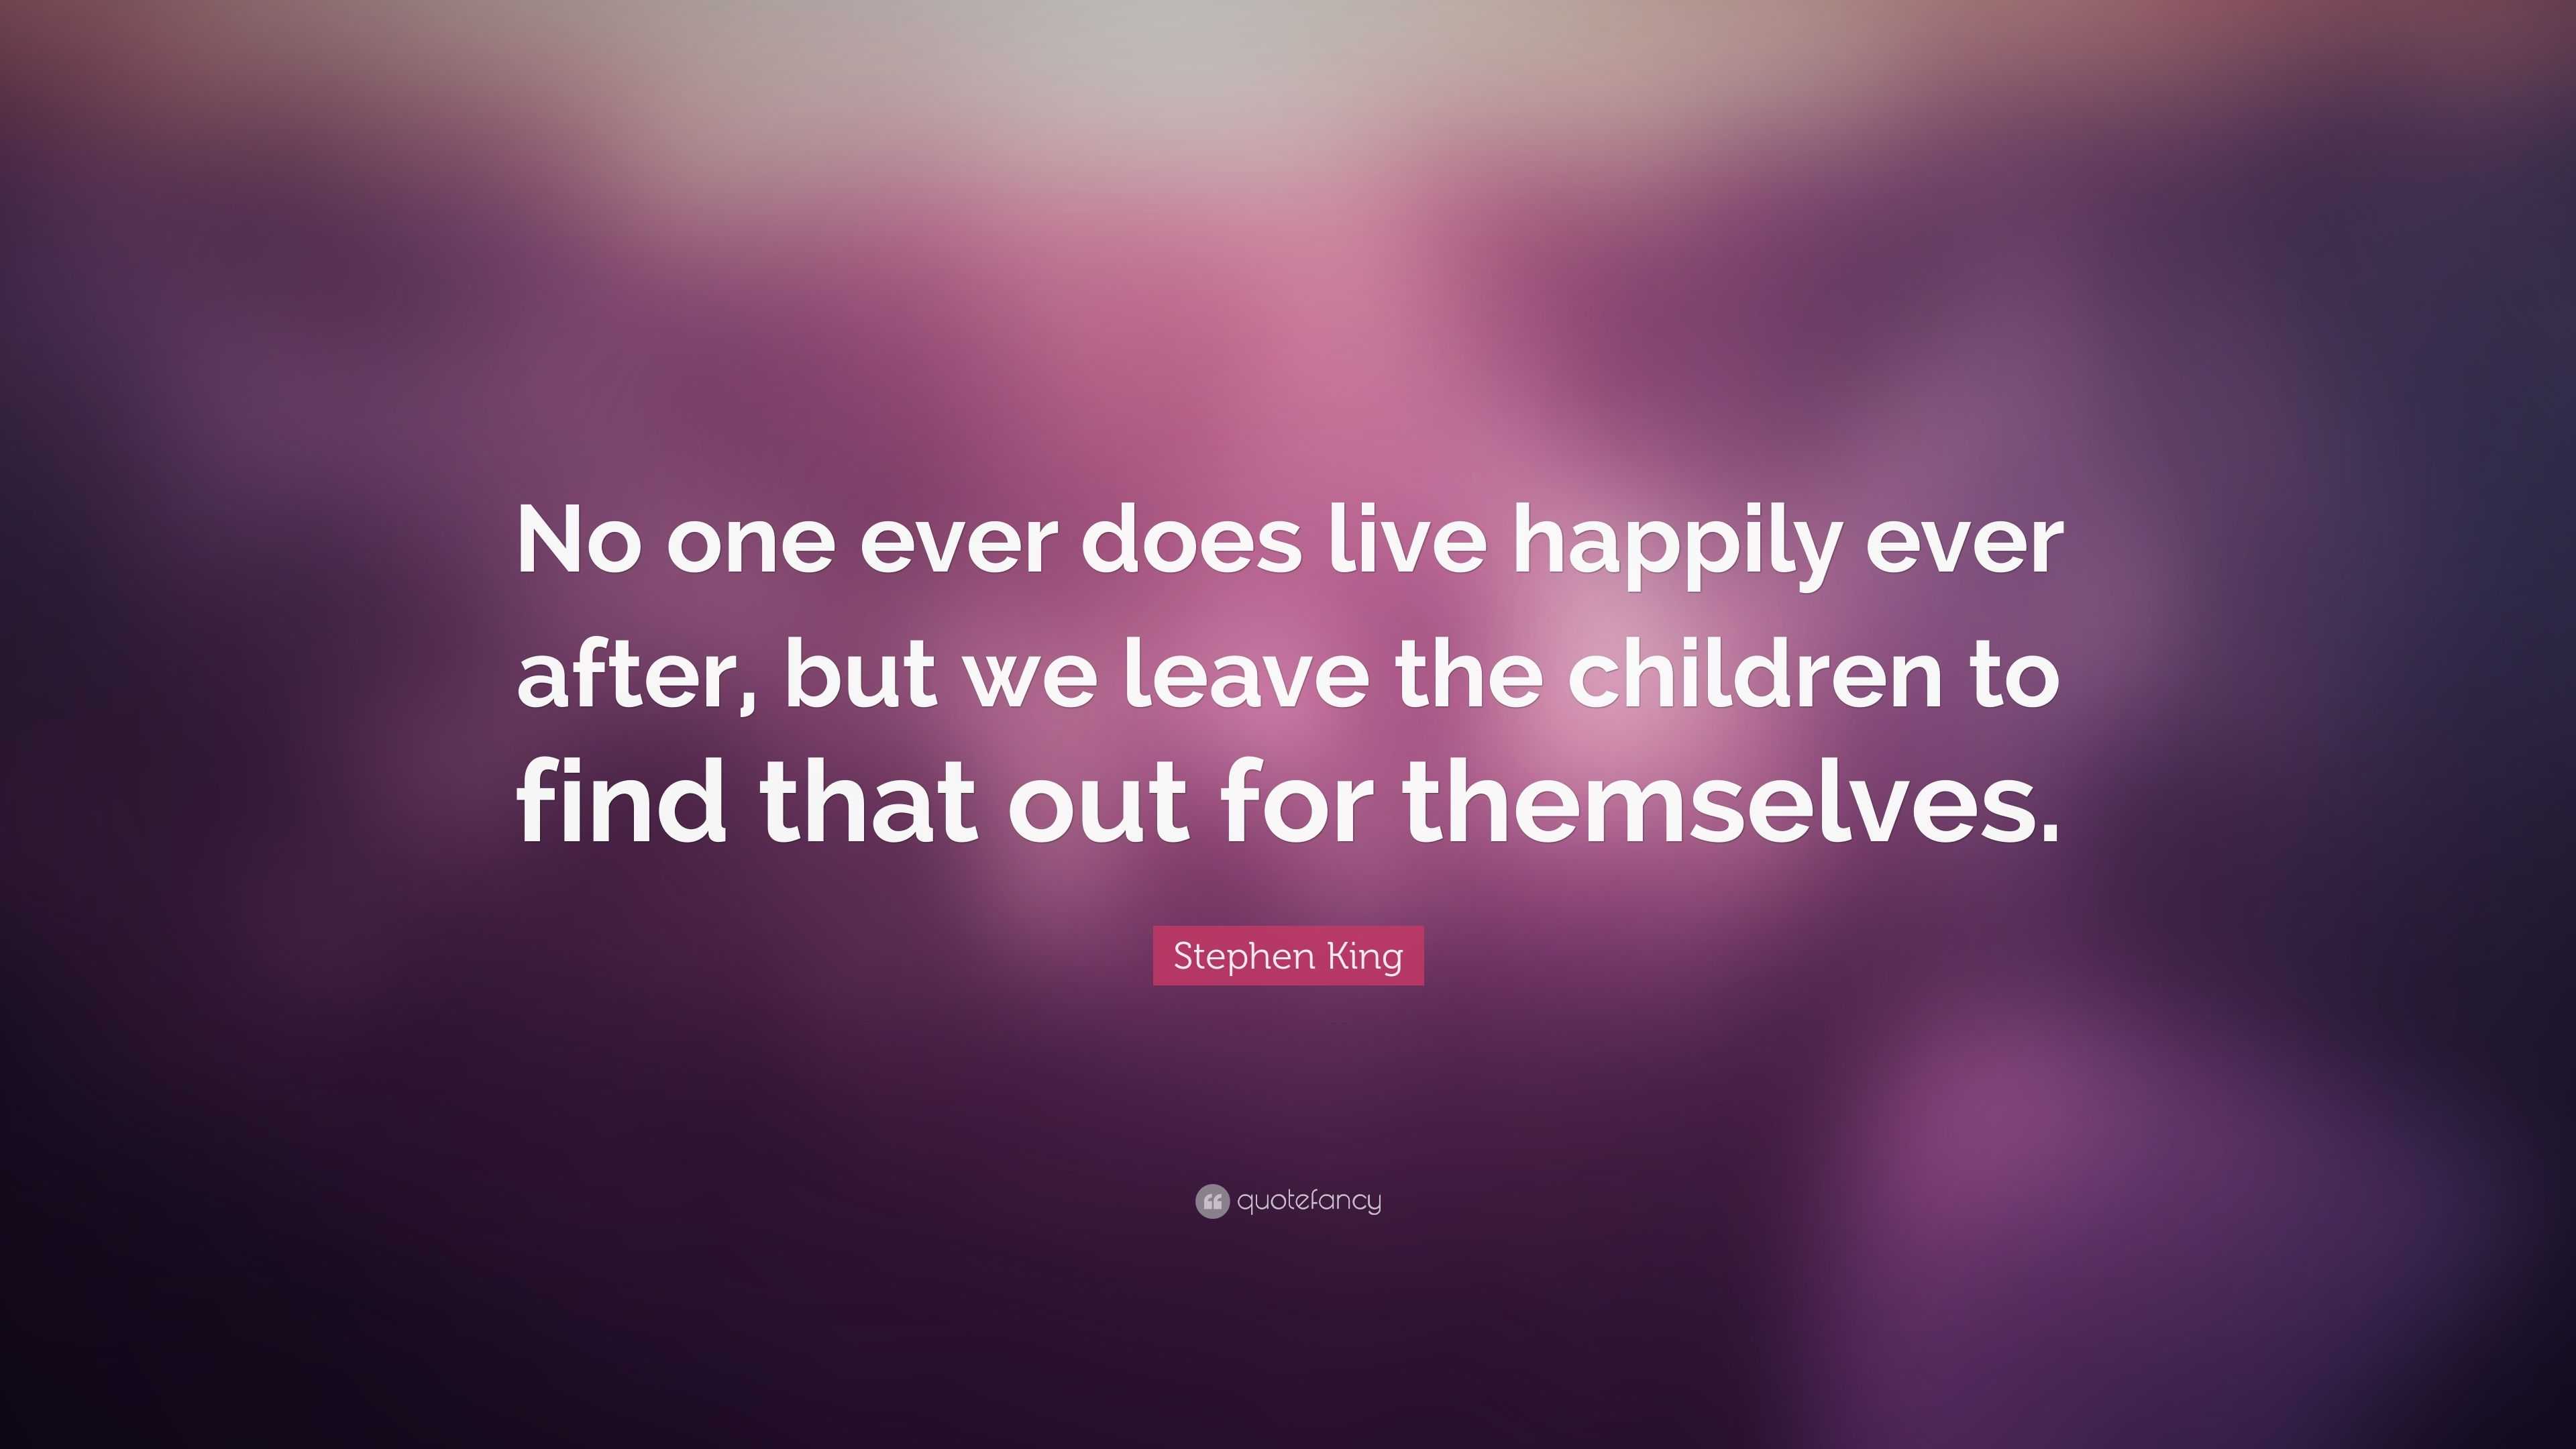 Stephen King Quote: “No one ever does live happily ever after, but we ...